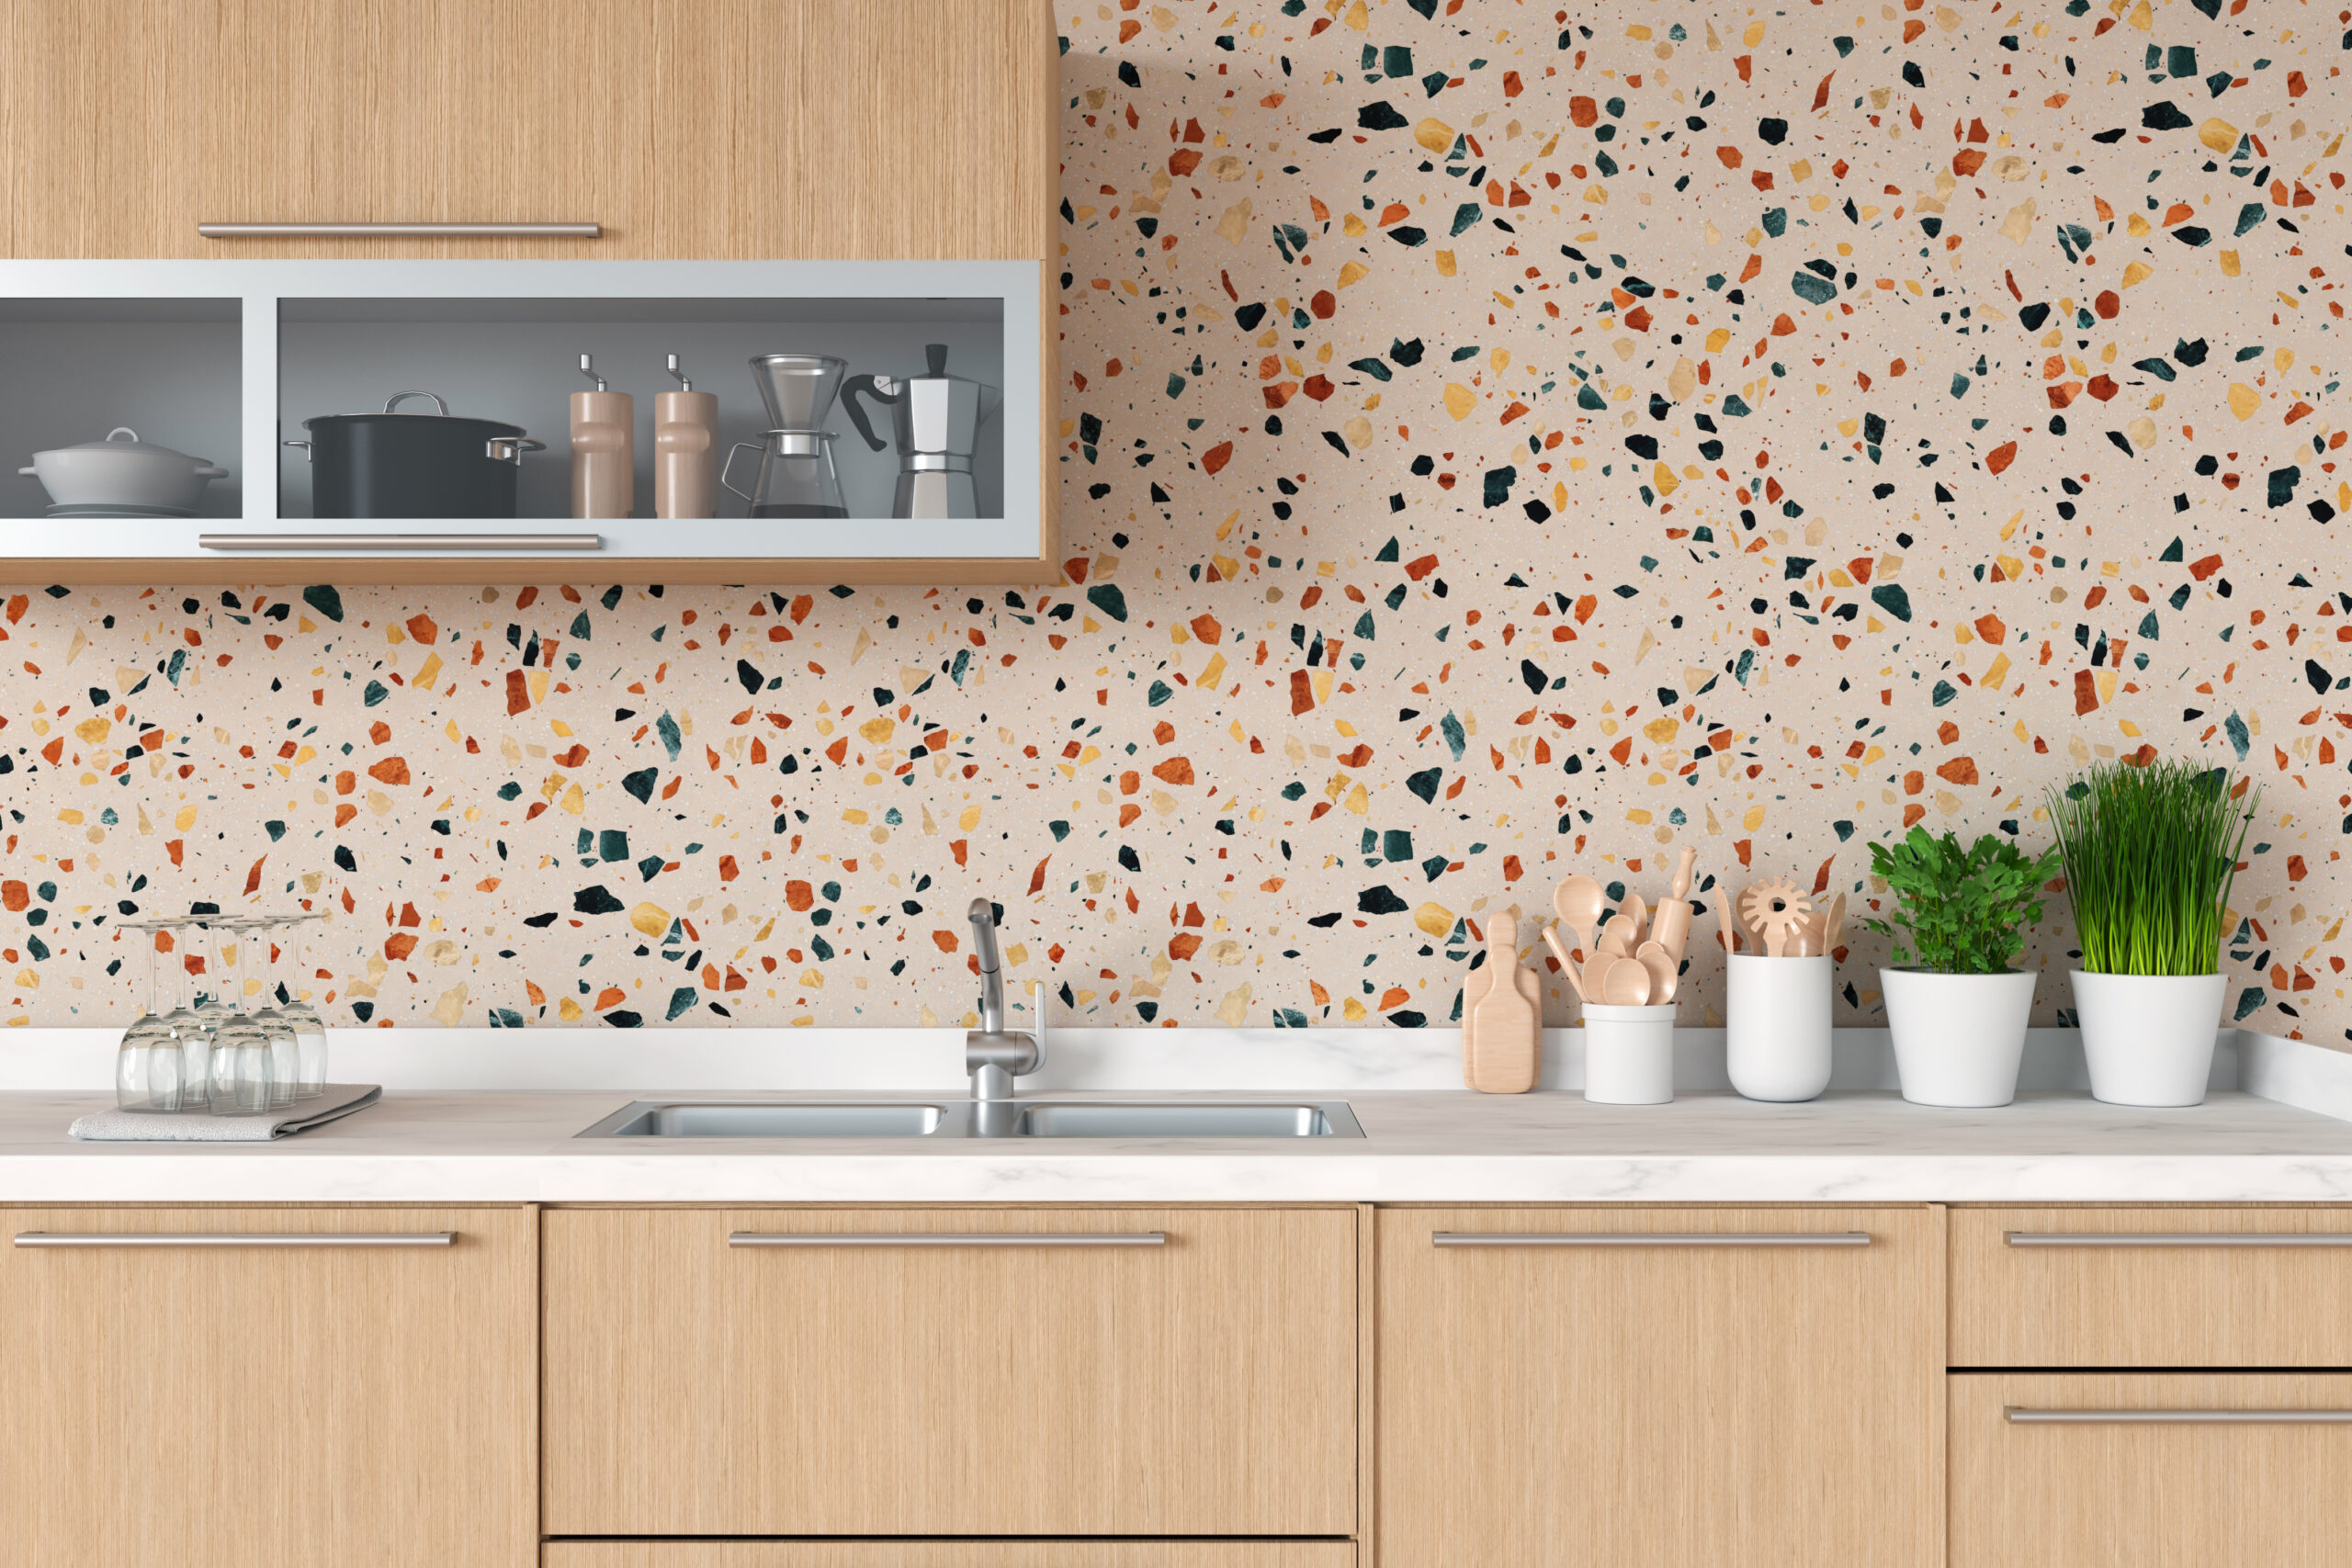 pinkish sprinkled terrazzo tile in a kitchen